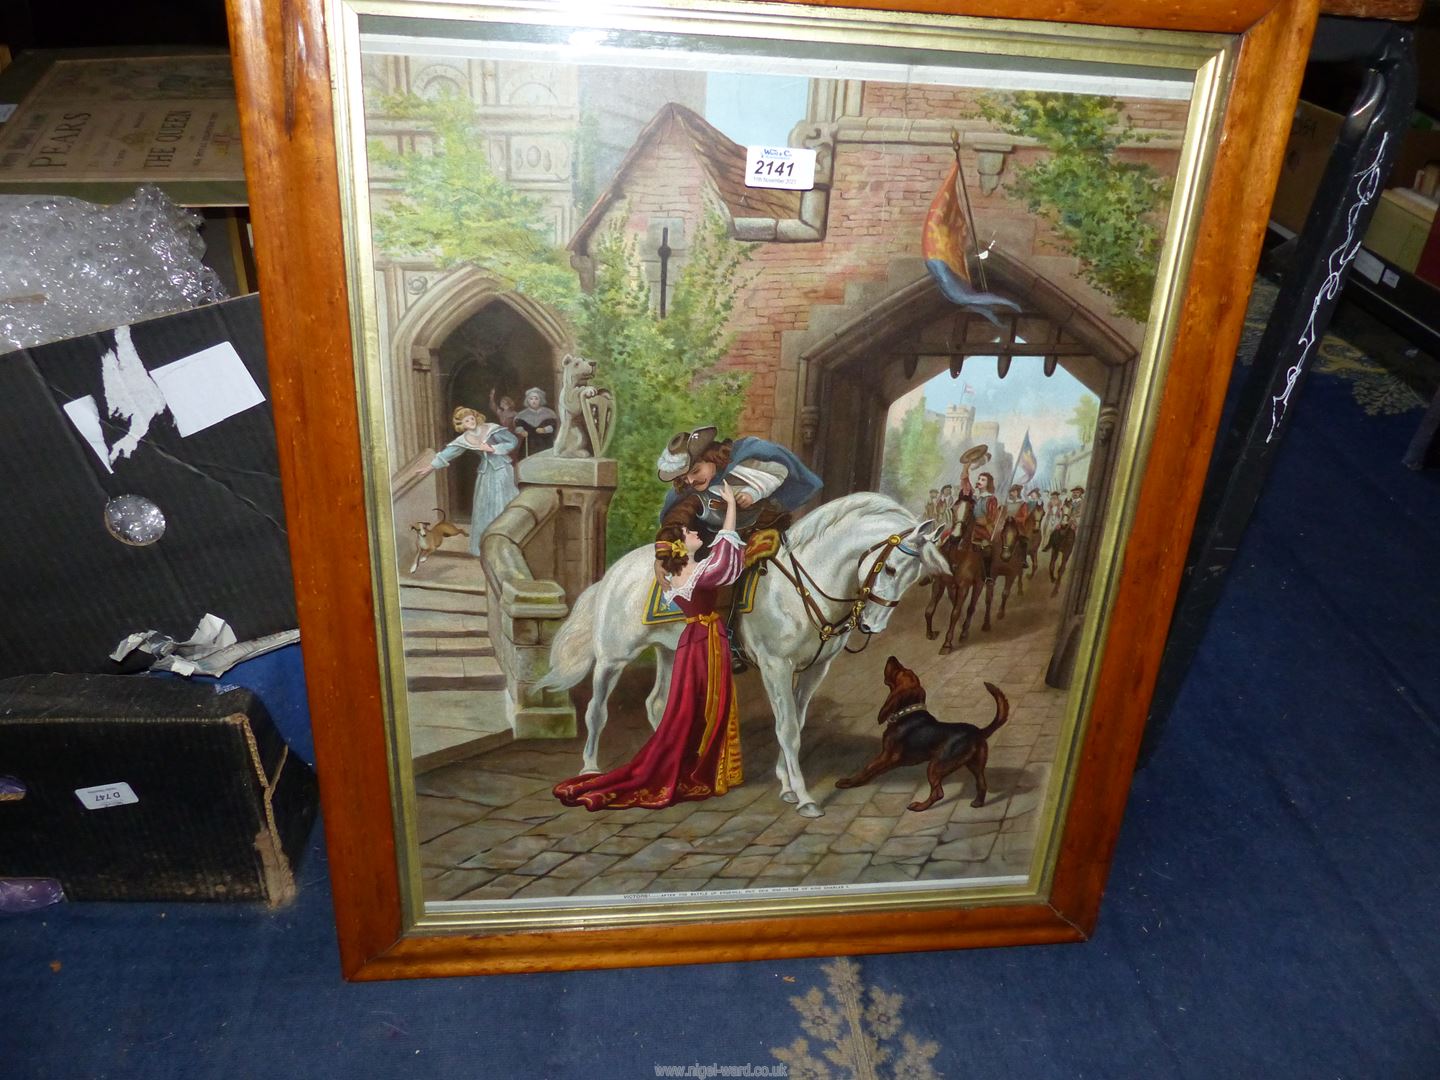 A framed Print "Victors After The Battle of Edgehill, Oct. 23rd 1642, Time of King Charles".